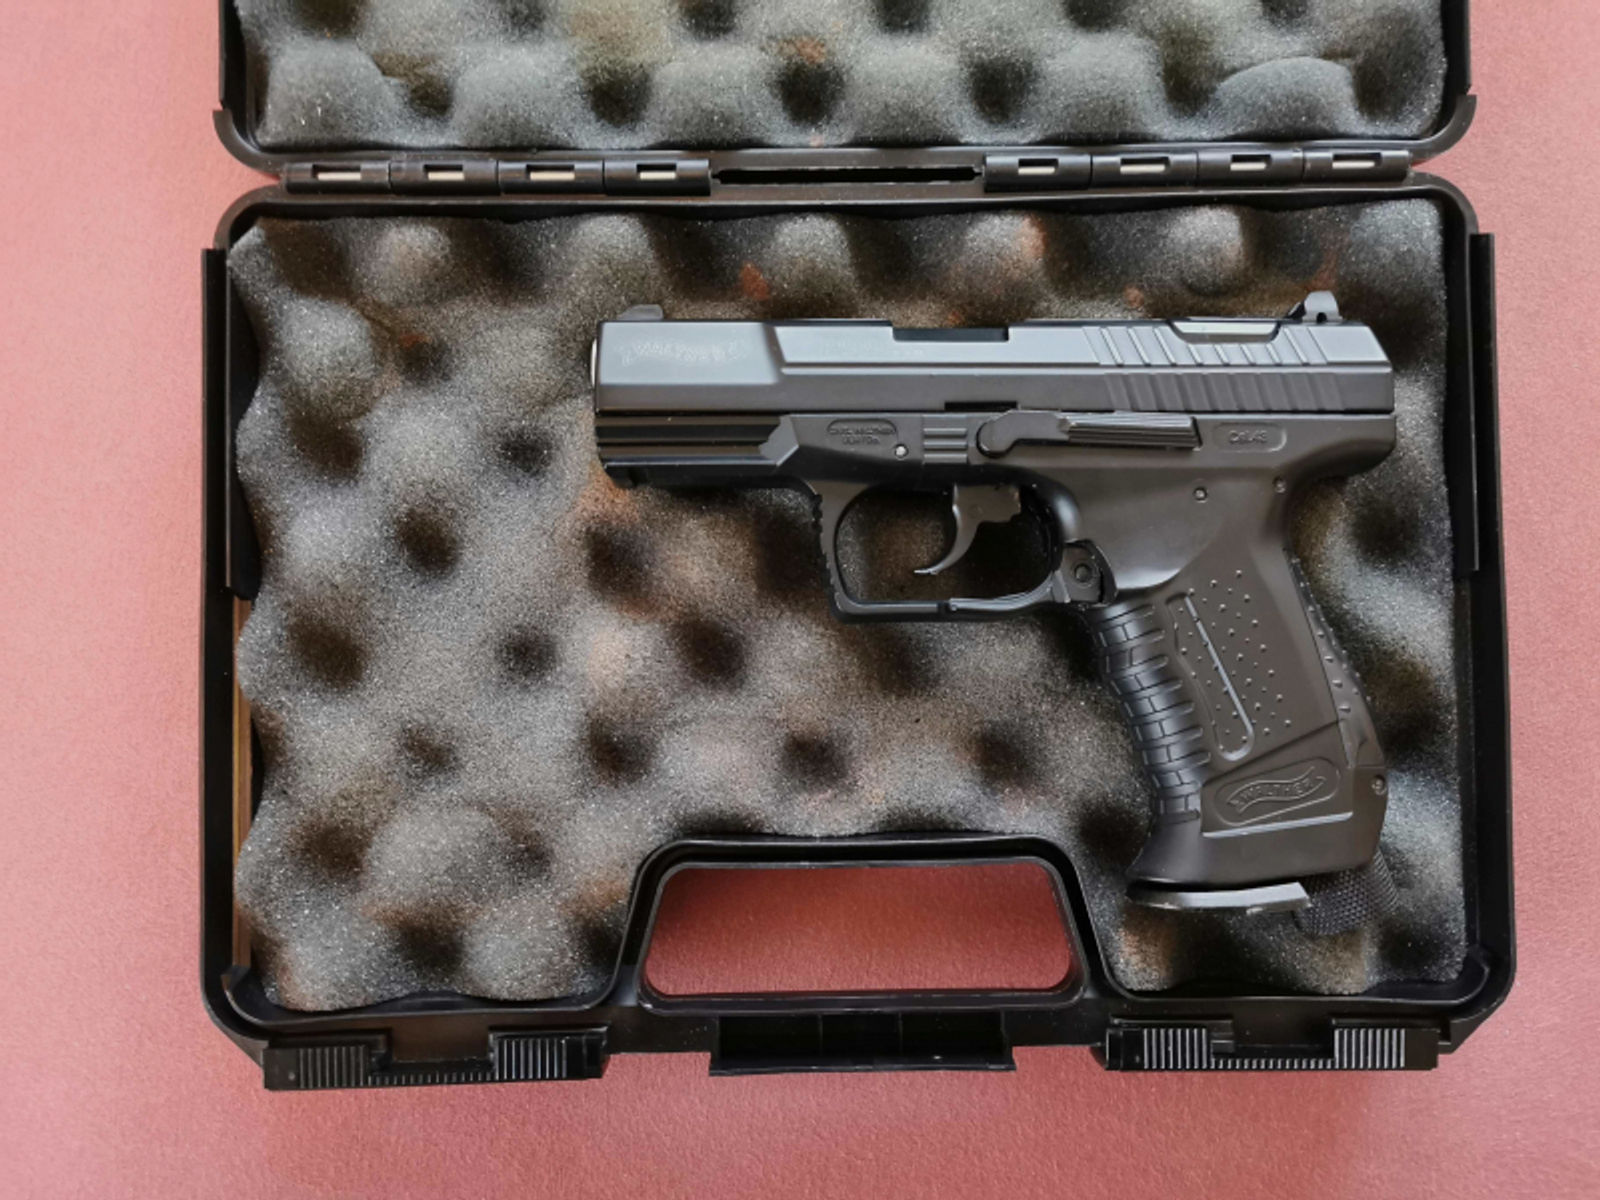 Pistole Walther P99 RAM